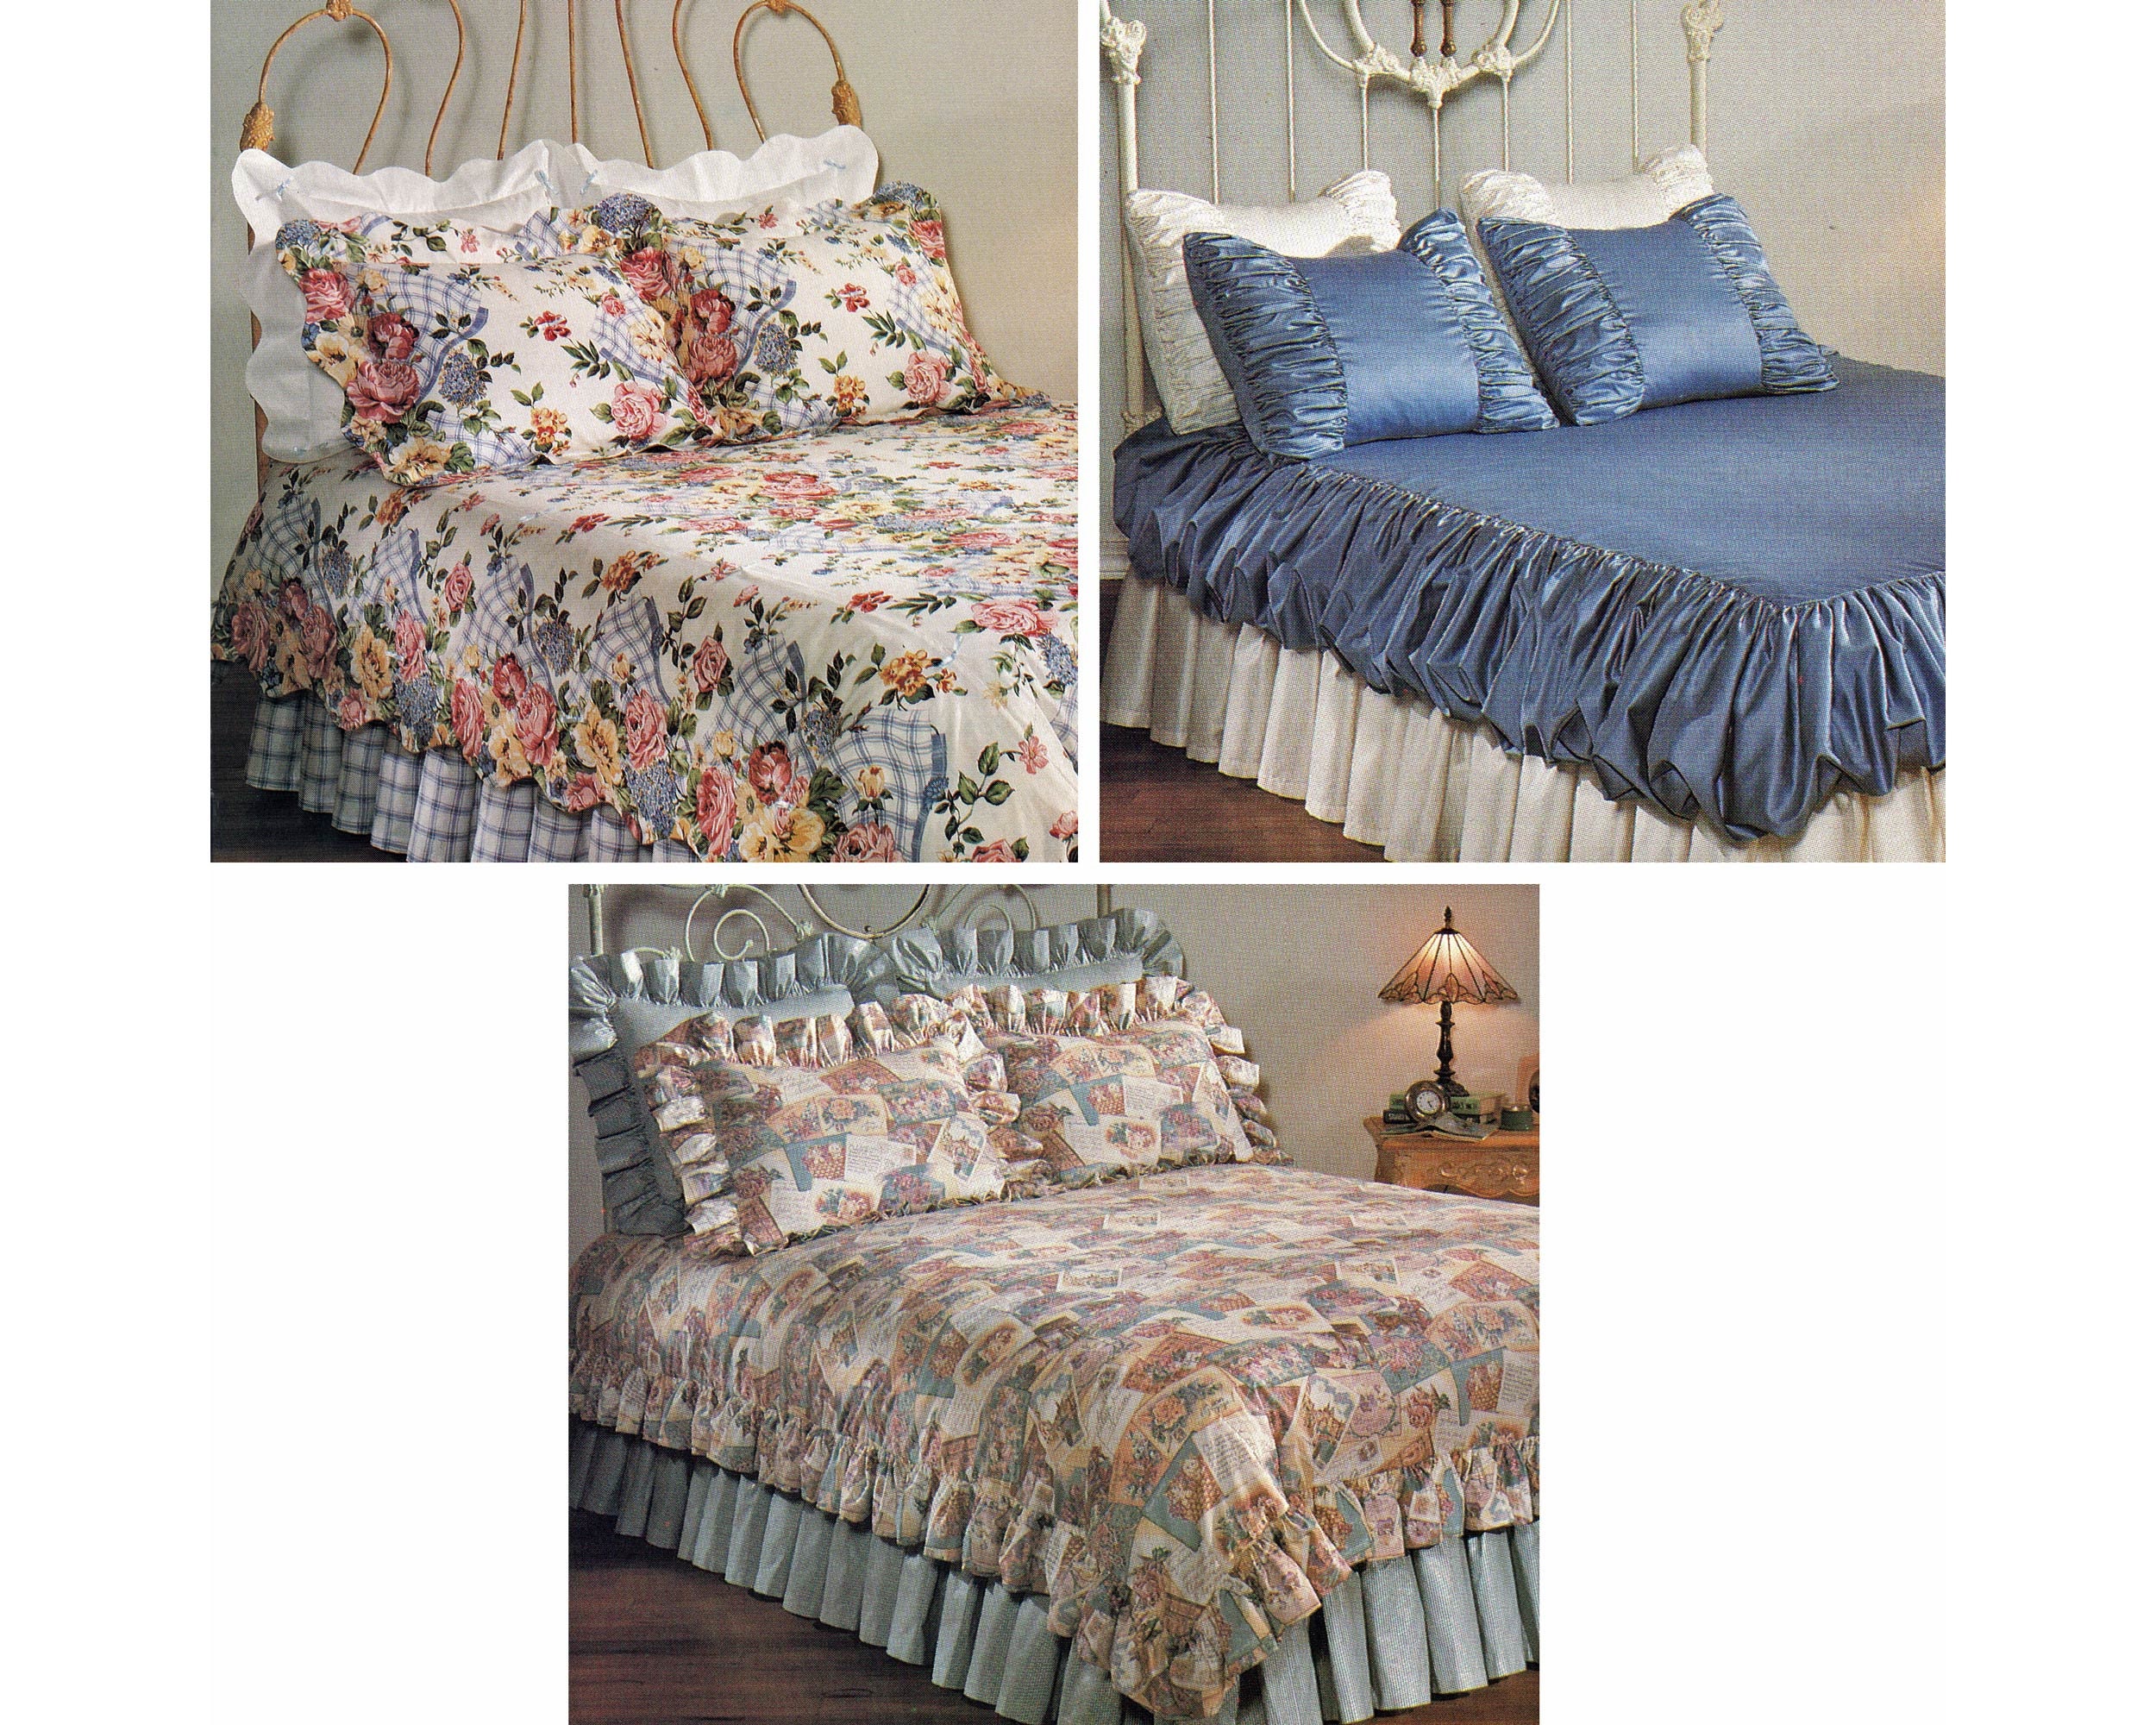 Sewing Pattern For Beddings Duvet Cover Dust Ruffle Pillow Etsy